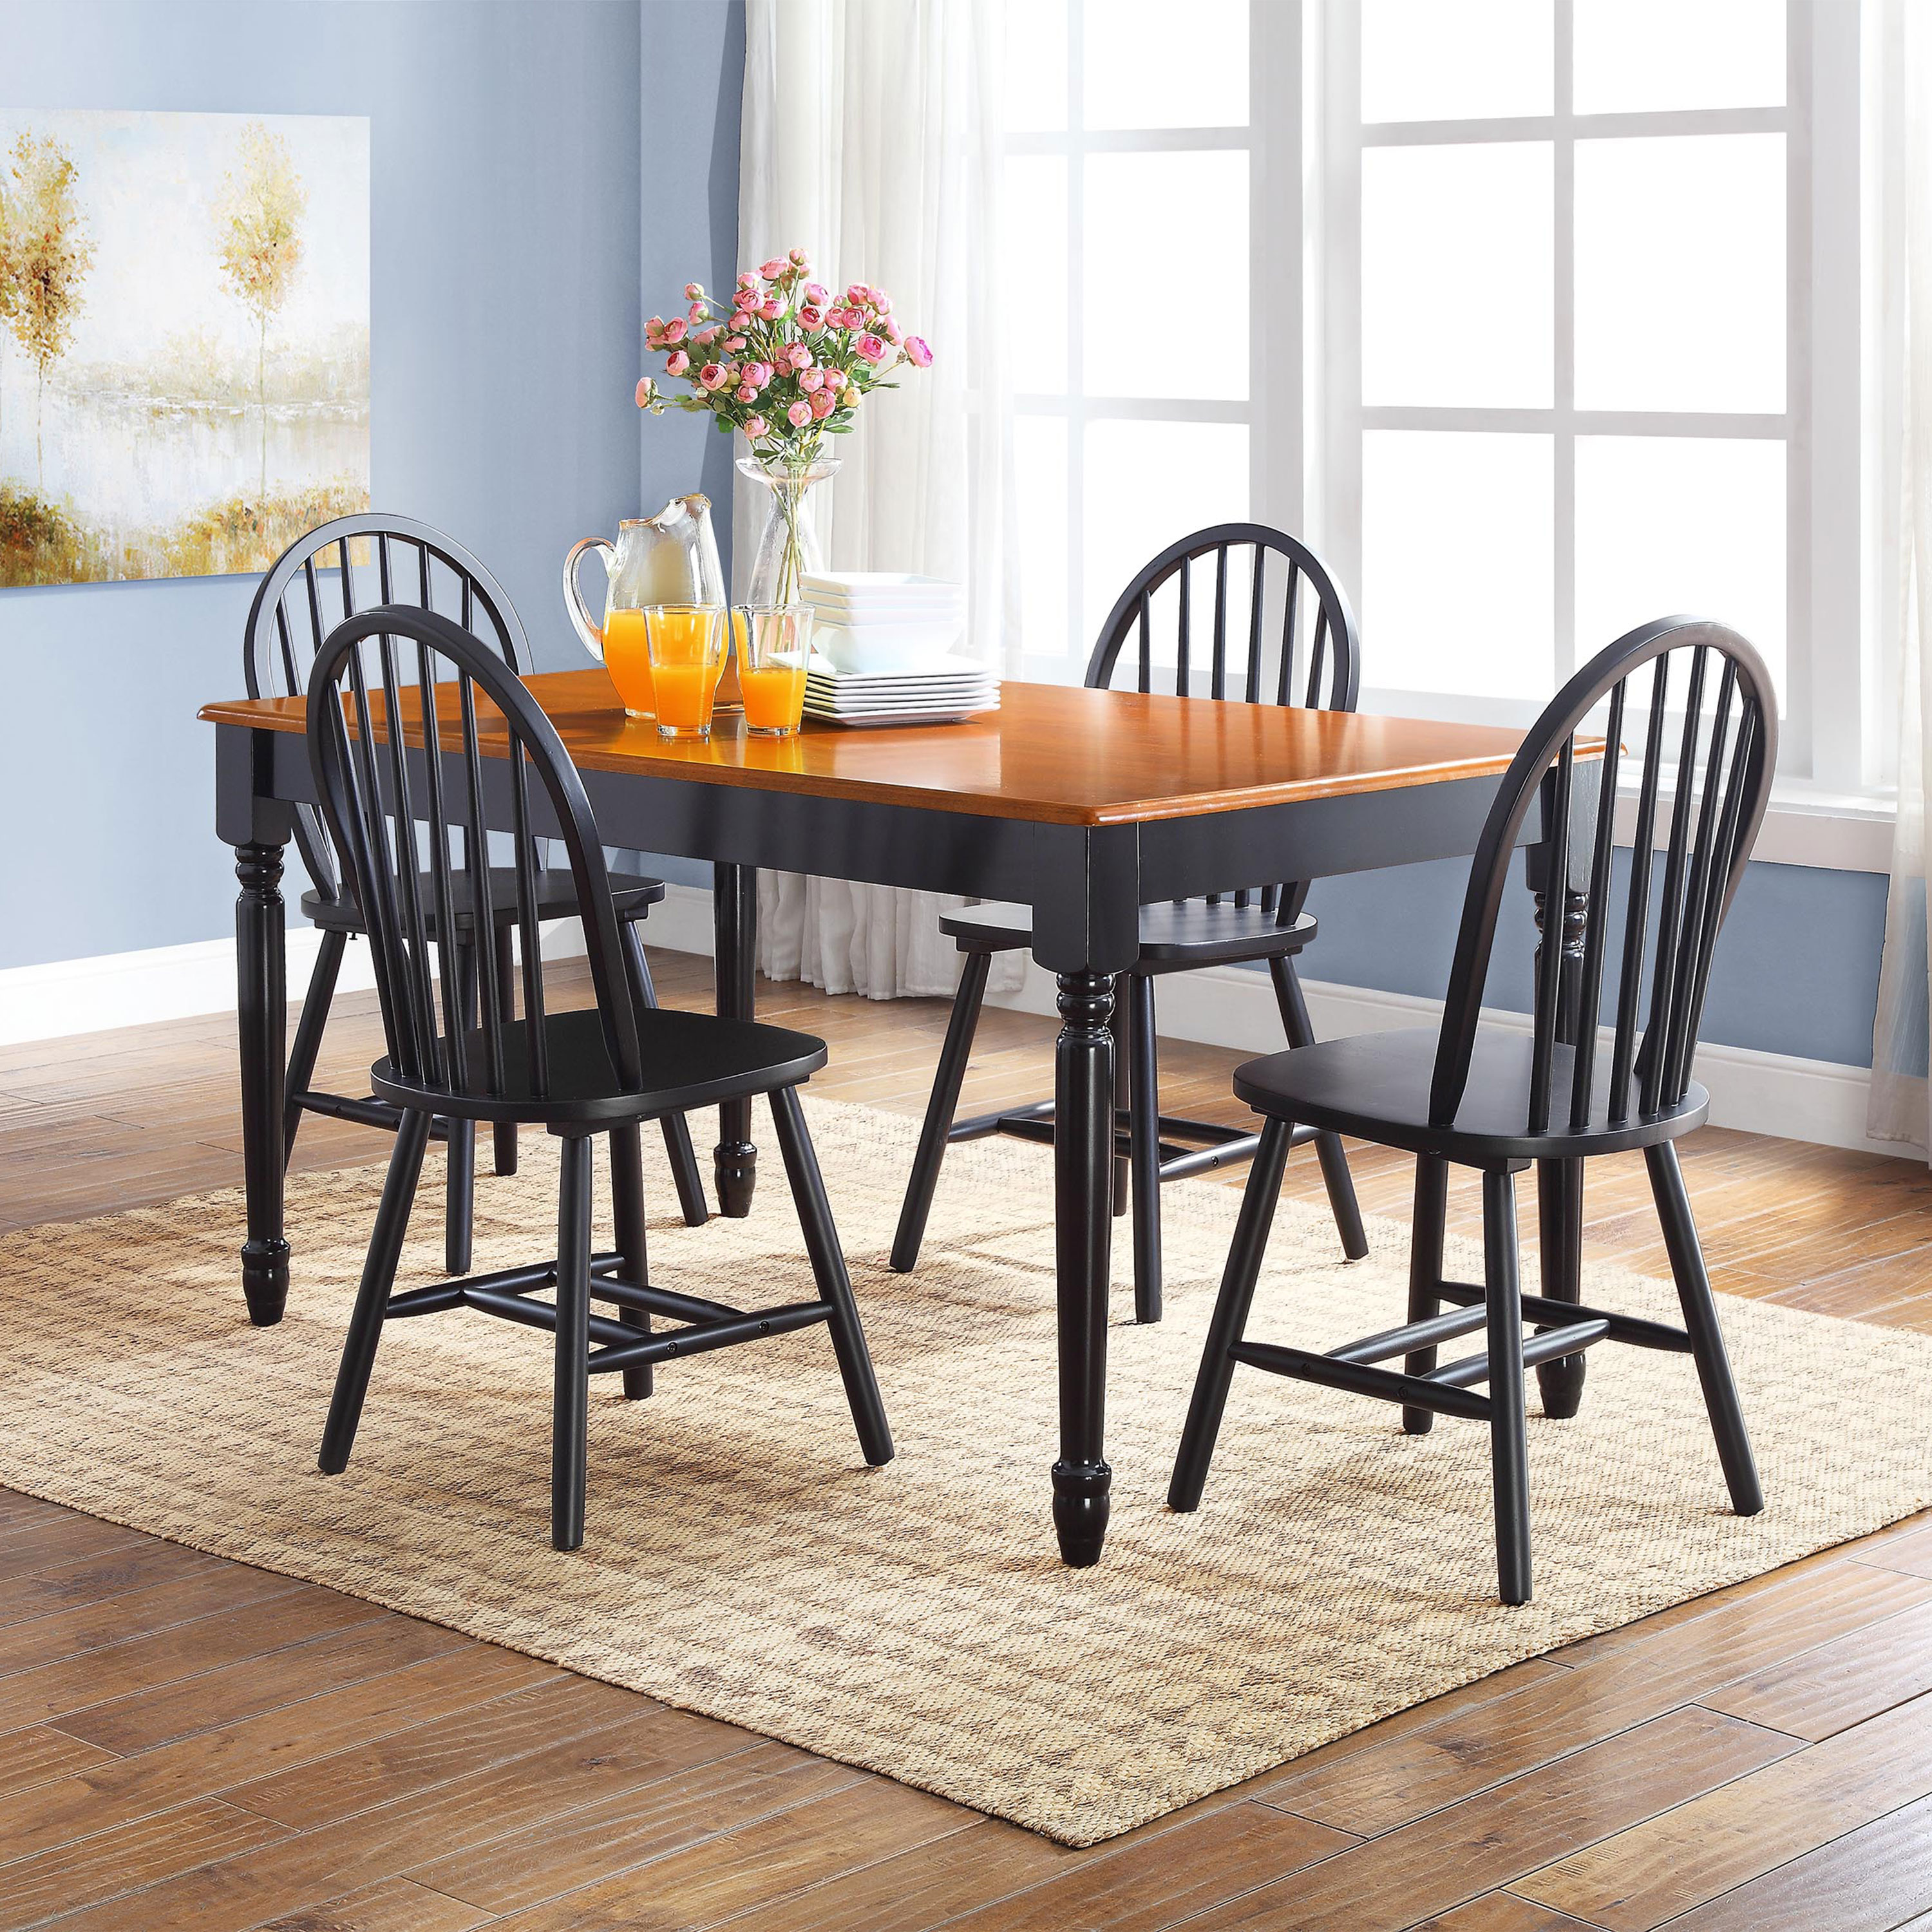 Better Homes and Gardens Autumn Lane Windsor Solid Wood Dining Chairs, Set of 2, Black Finish - image 5 of 10